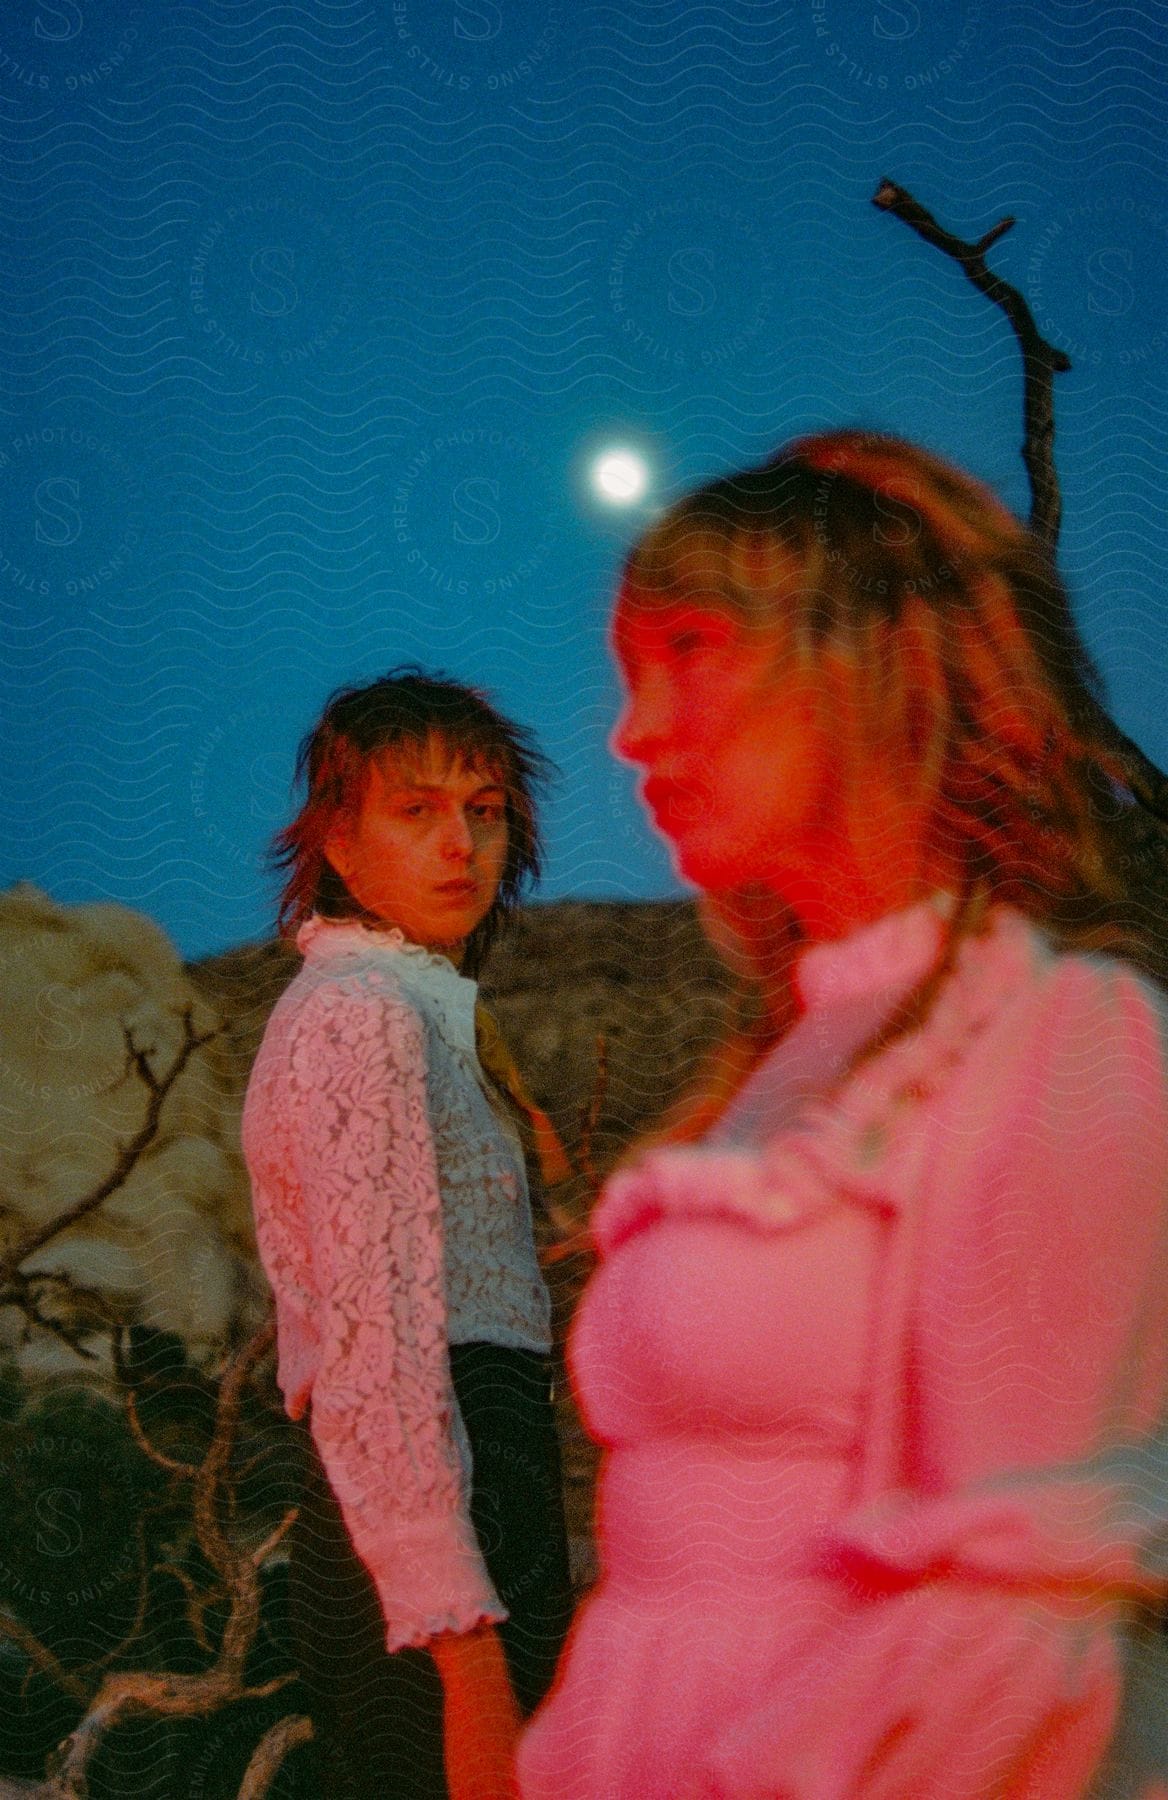 Two women, one in a white dress and the other in a blouse, stand beneath the shining moon in the desert.